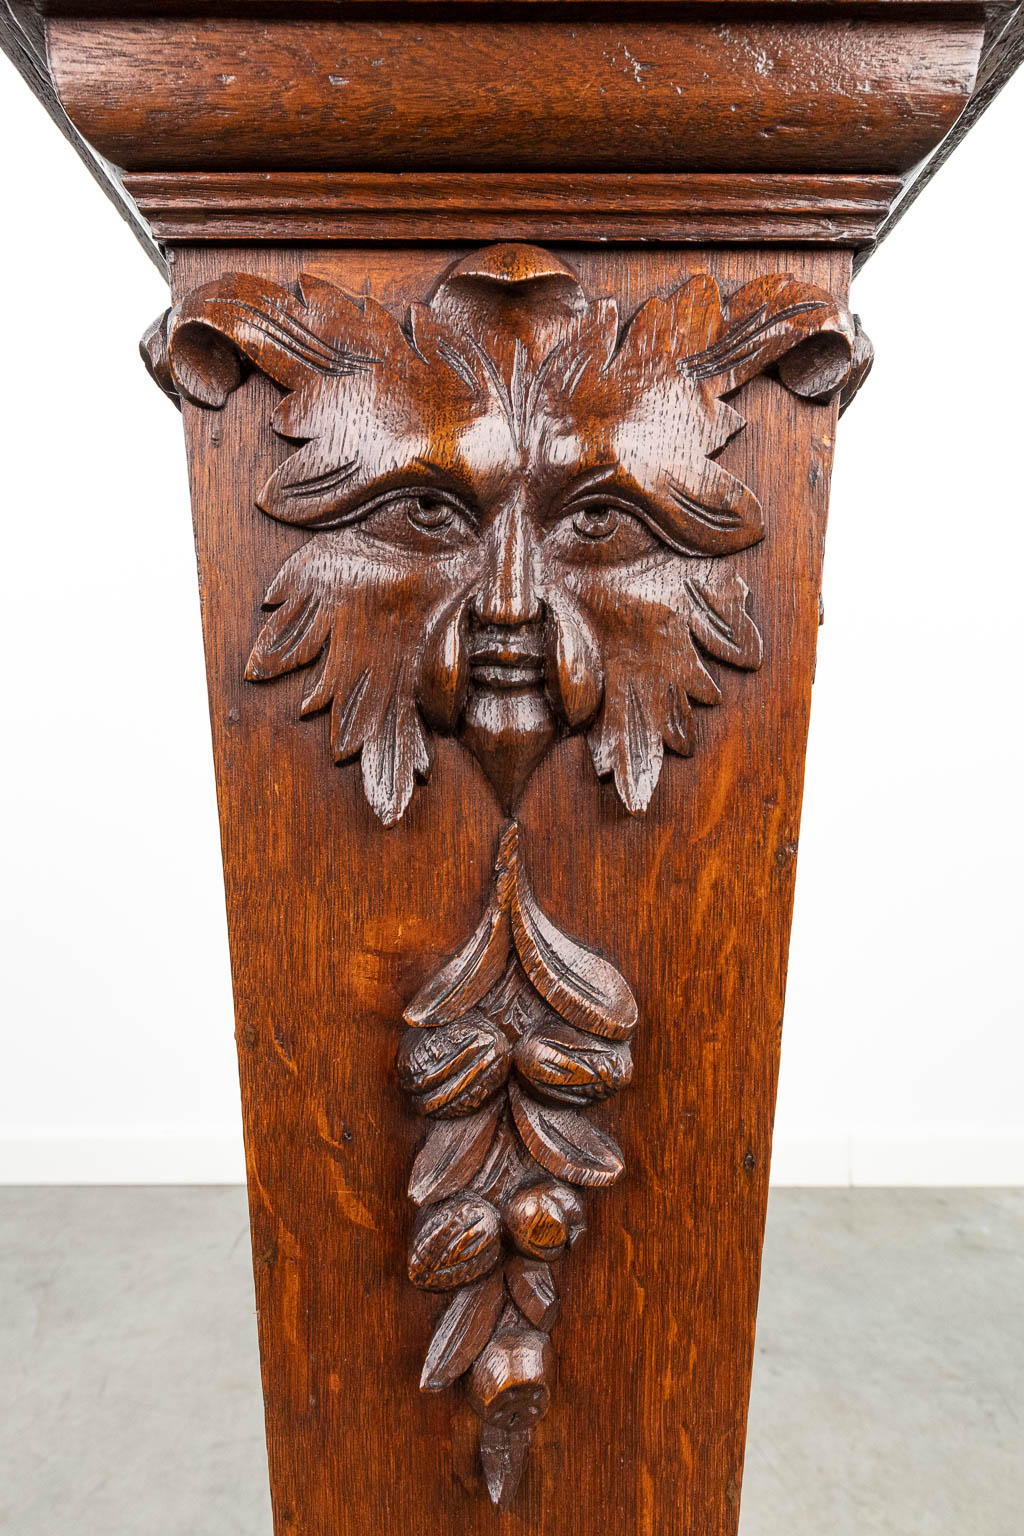 A pedestal made of sculptured wood and finished with mythological figurines. (H:99cm)